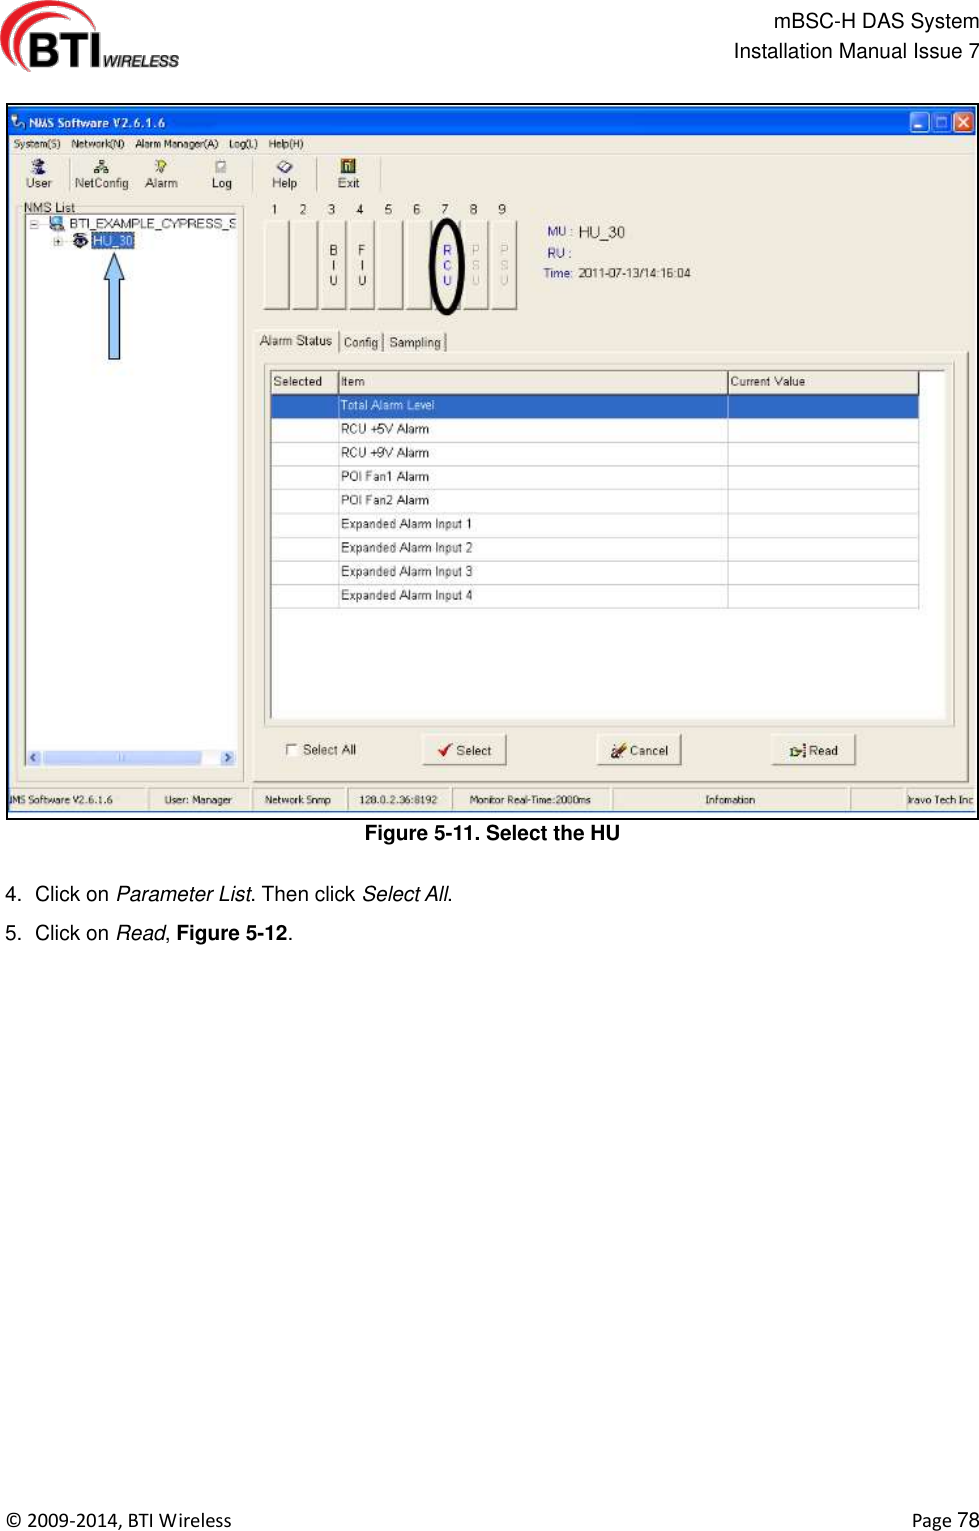                                                   mBSC-H DAS System   Installation Manual Issue 7  ©  2009-2014, BTI Wireless    Page 78  Figure 5-11. Select the HU  4.  Click on Parameter List. Then click Select All. 5.  Click on Read, Figure 5-12.  